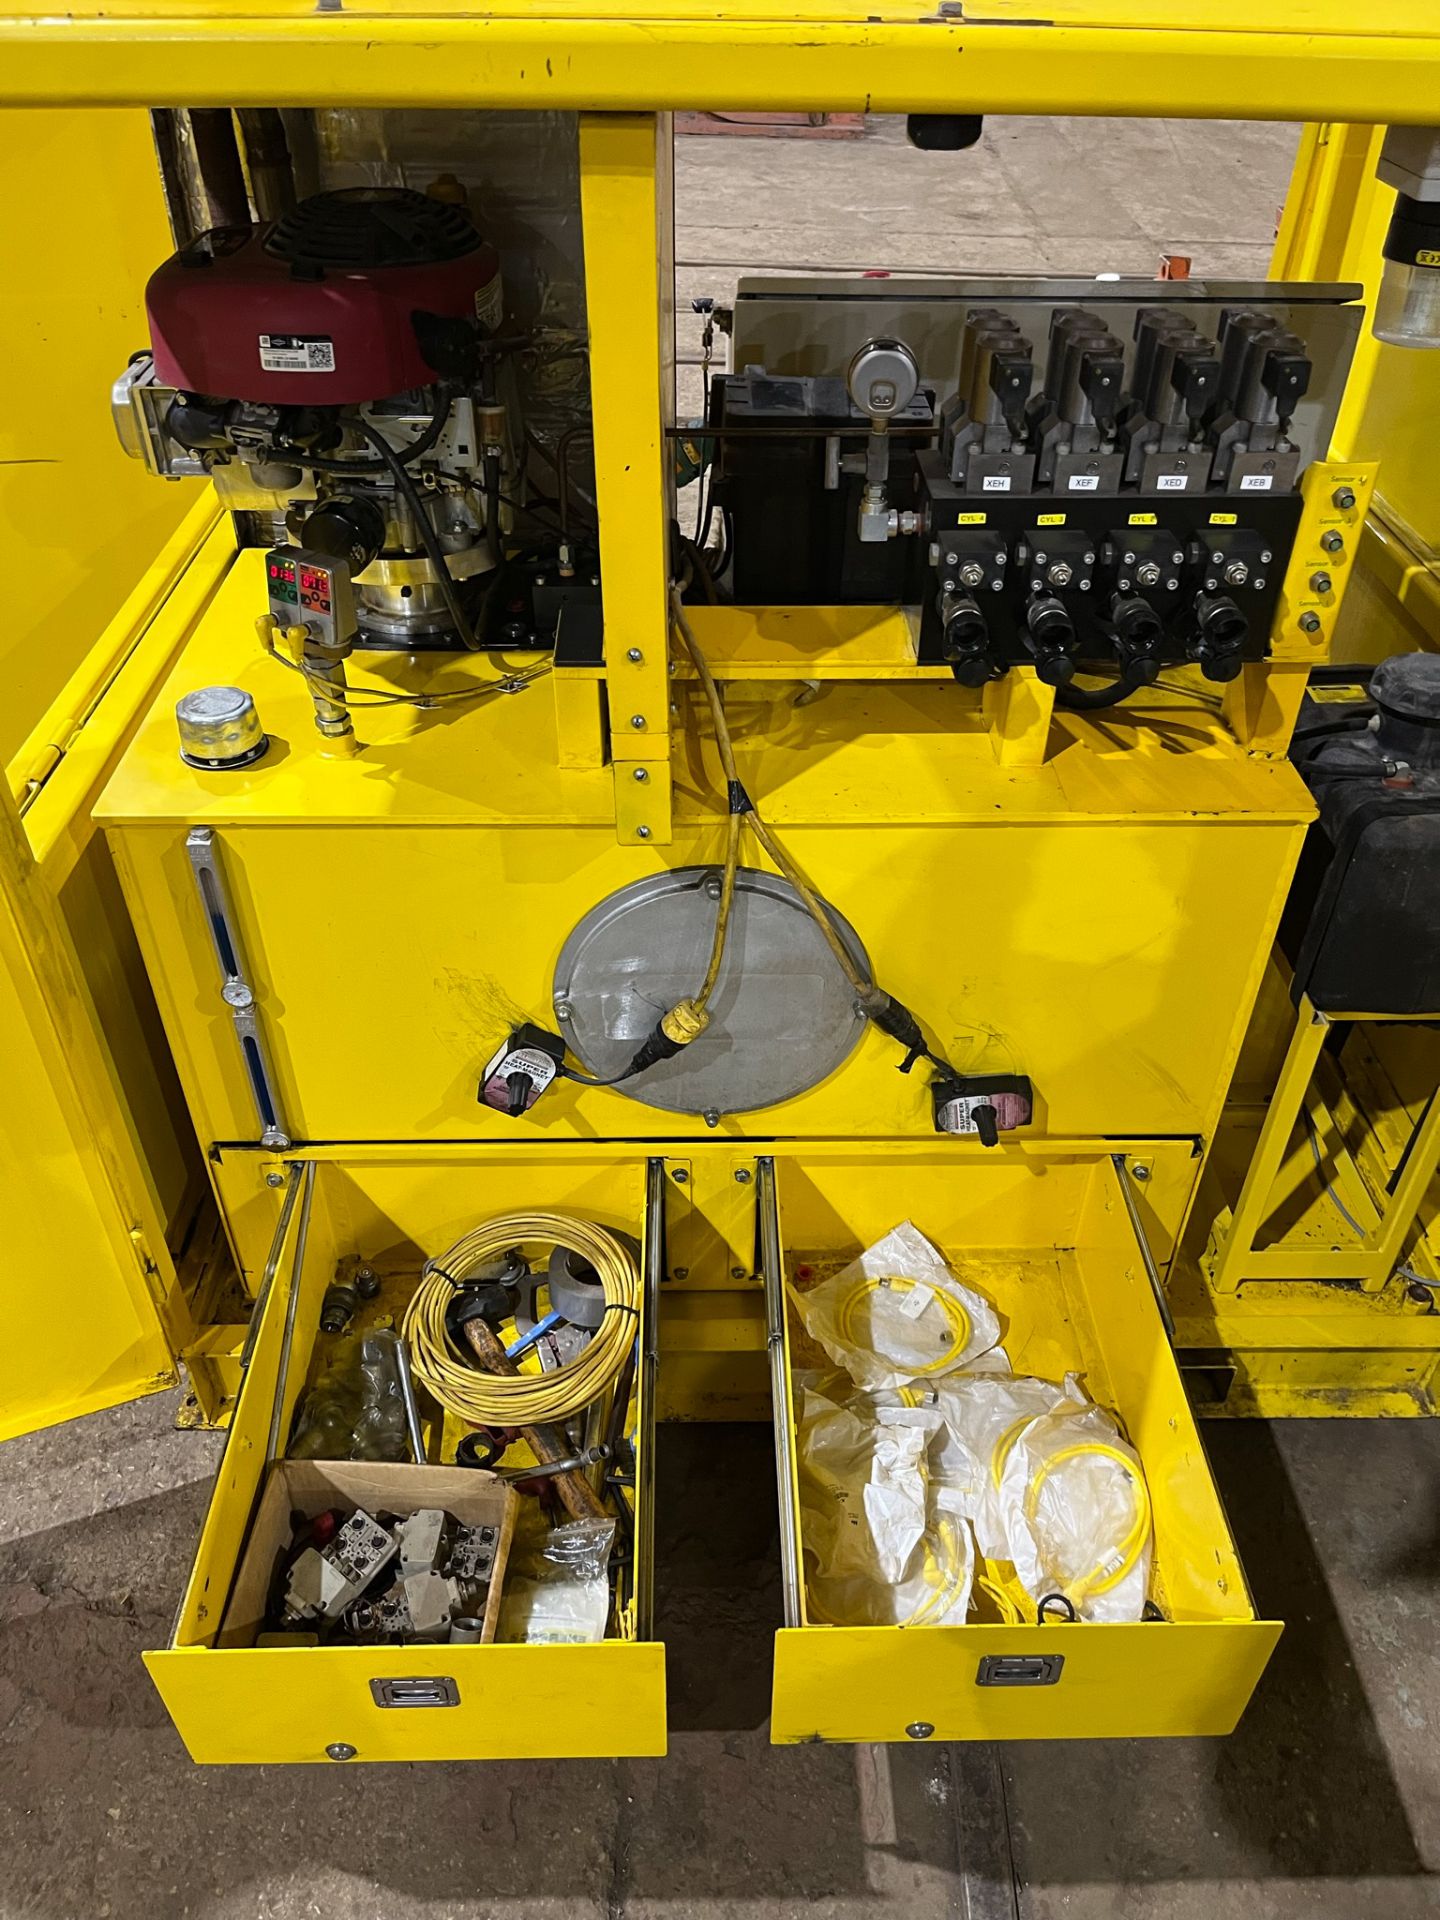 ENERPAC SYNCHRONOUS HOIST SYSTEM WITH STORAGE/SHIPPING CADDY; (4) 100 TON CAPACITY CYLINDERS - Image 17 of 46